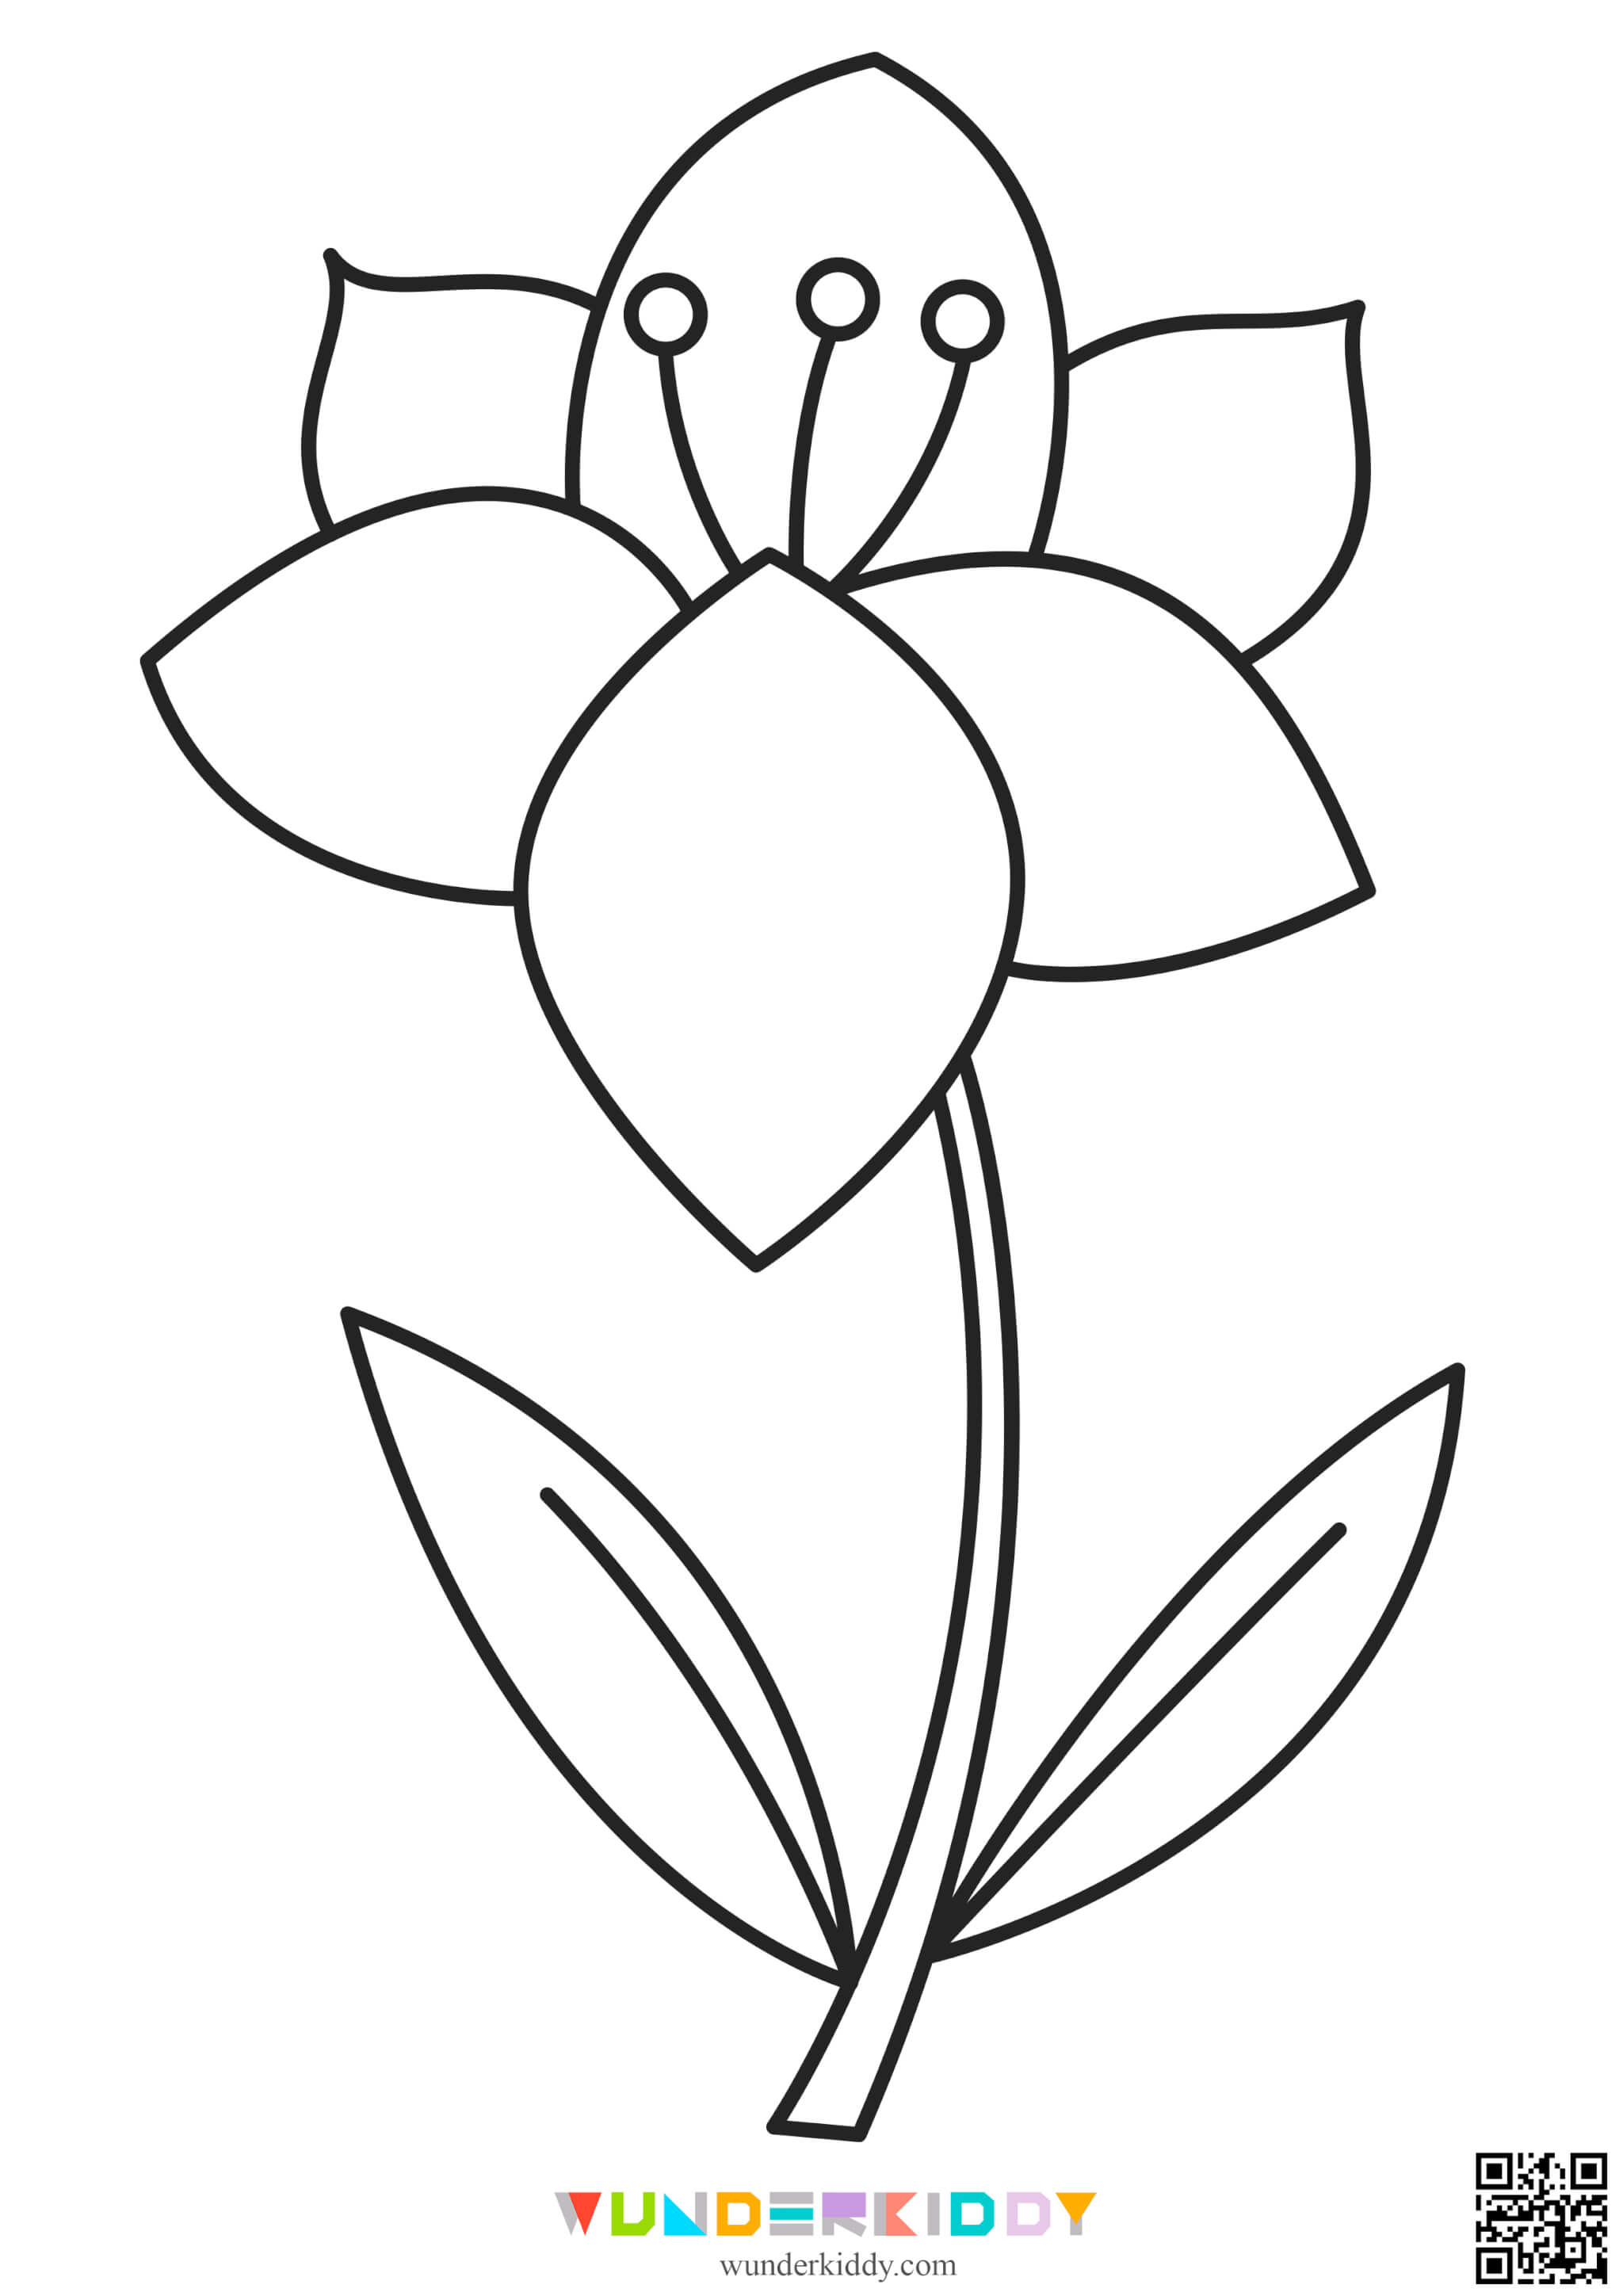 Flower Printable Coloring Pages - Image 6